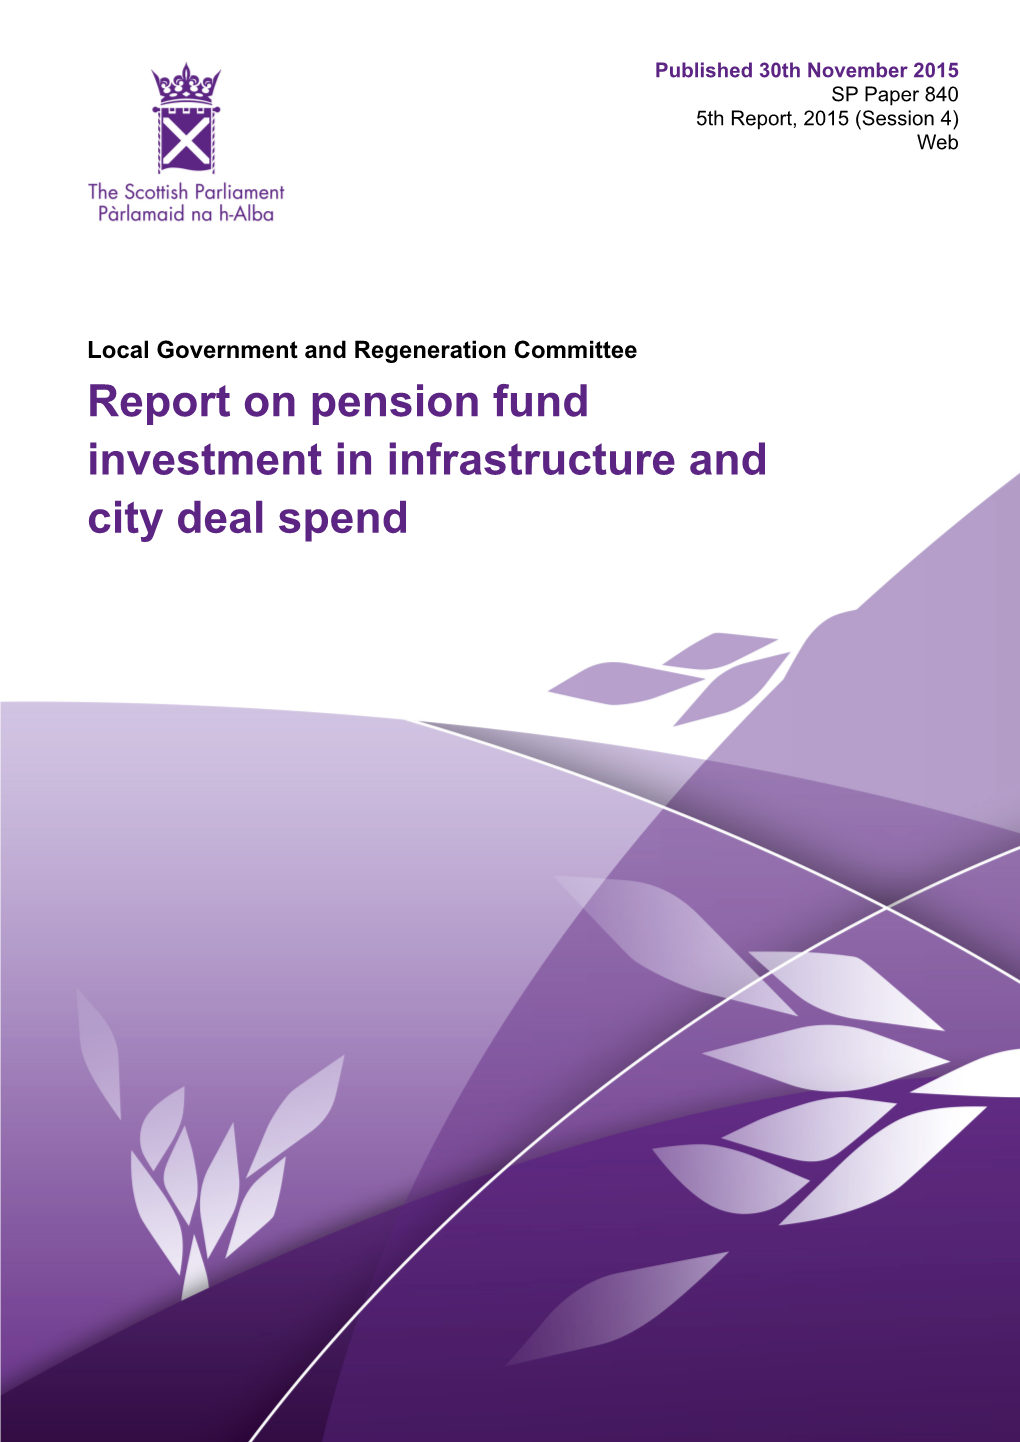 Report on Pension Fund Investment in Infrastructure and City Deal Spend